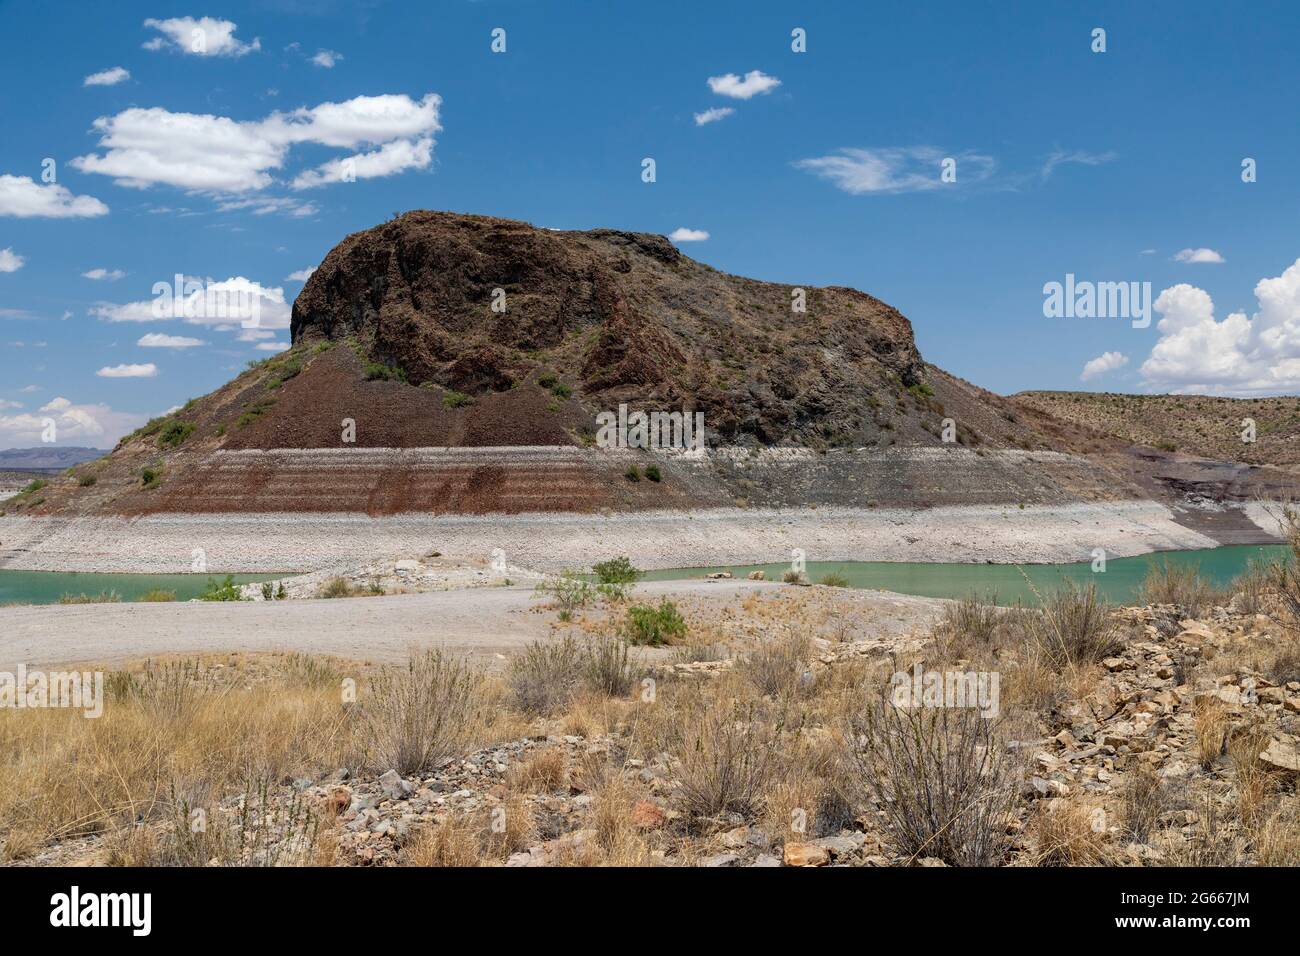 Truth or Consequences, New Mexico - Elephant Butte, an island in the Elephant Butte reservoir. on the Rio Grande. The reservoir holds water for southe Stock Photo